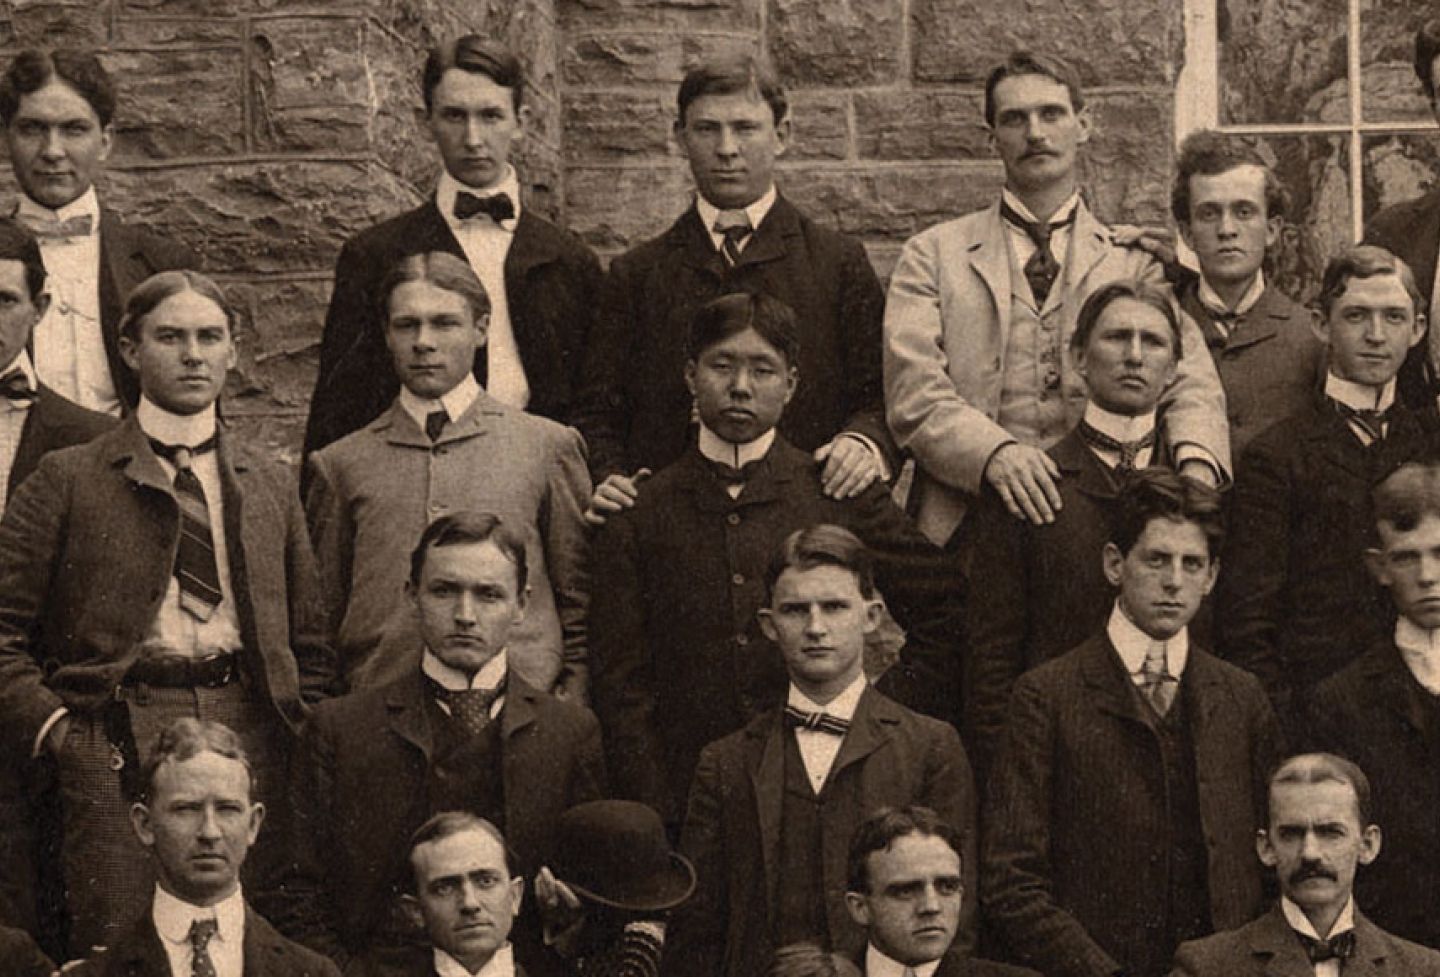 Hiraoaka Ryosuke of Hakate, Japan (second row, center), studied law with the Class of 1900, along with W.W. Yen (not pictured), UVA’s first Chinese graduate.